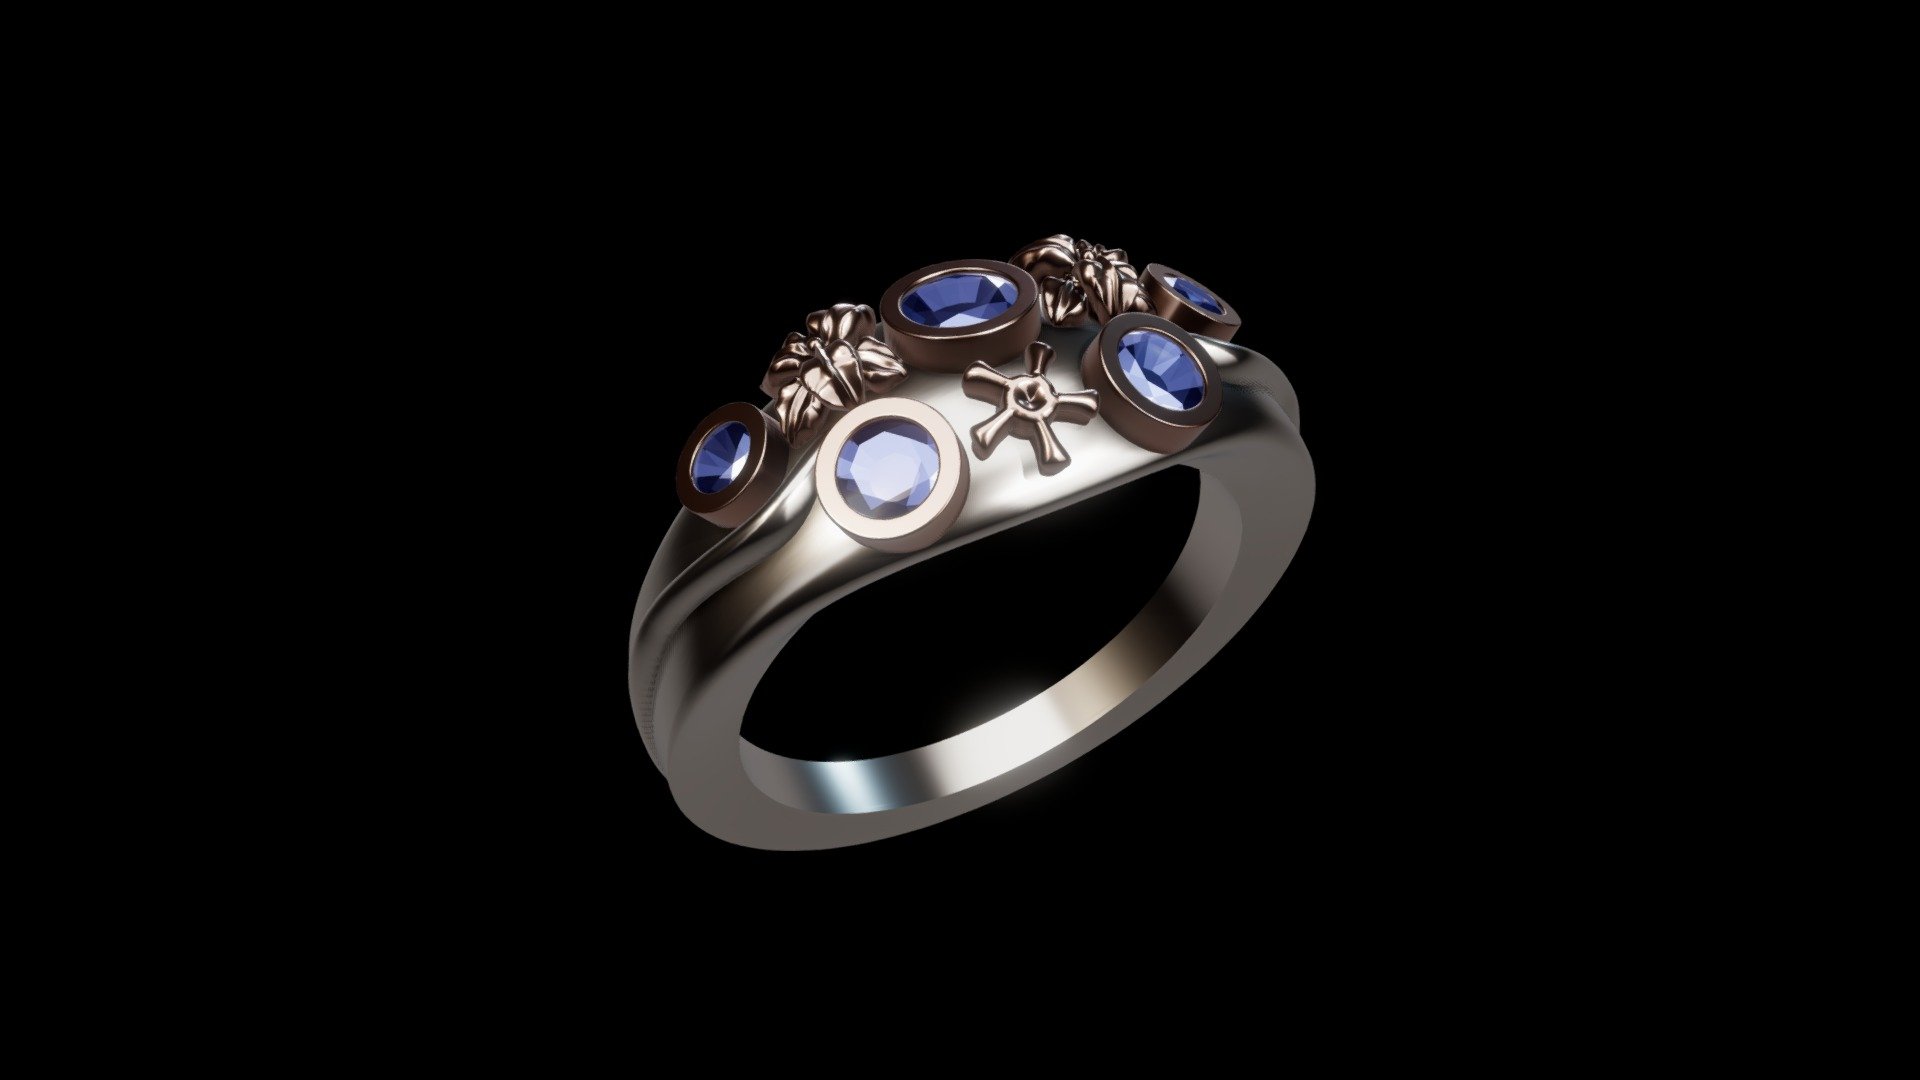 This is the wedding ring I designed for my wife for our wedding last year. I modelled this in Cinema 4D and Blender. It 3D printed in wax, cast in rose gold and white gold and put together, and sapphire stones set by a professional jeweller. It was stressful, but fun to create and I'm very happy with how it turned out 3d model